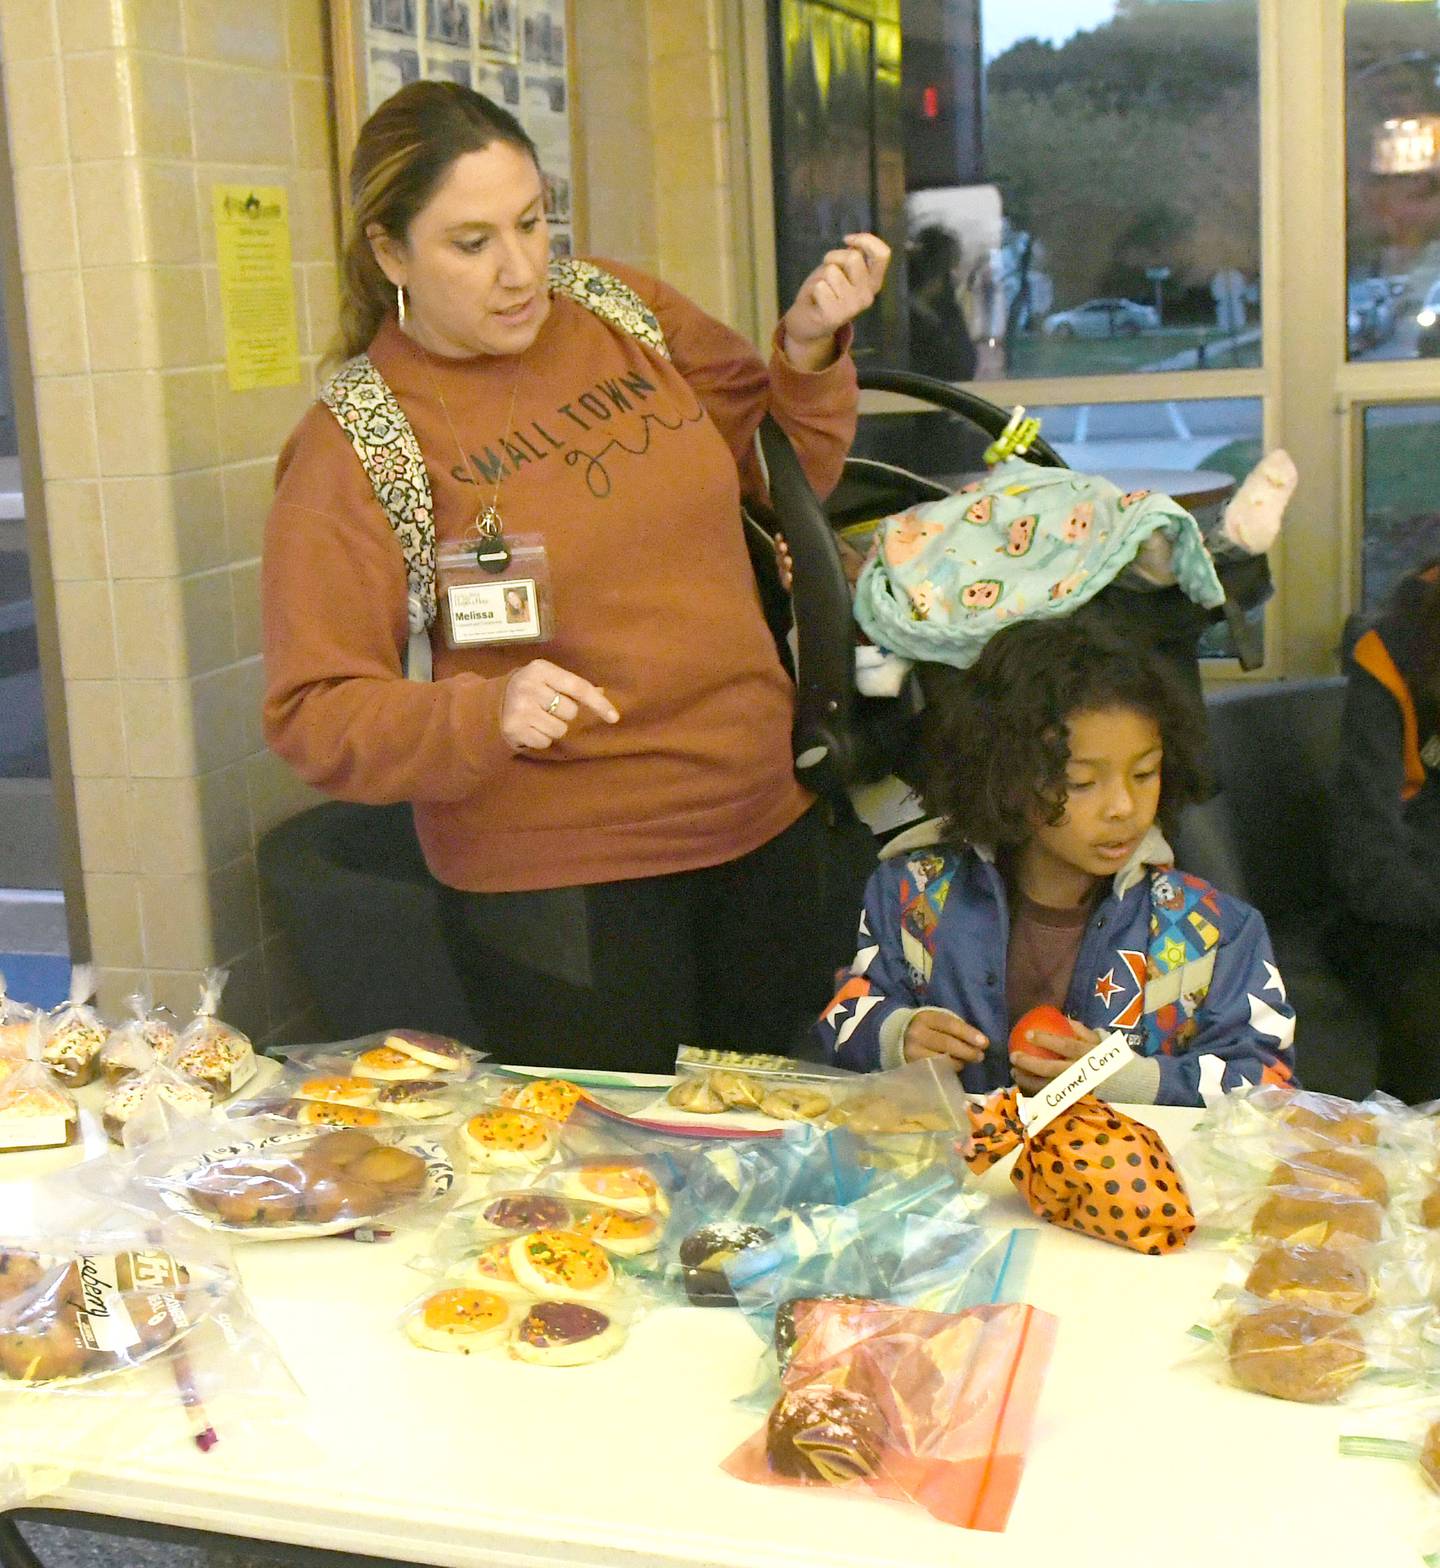 Melissa Ryan of Milledgeville looks over baked goods for sale at the Polo volleyball team's fundraiser for two Milledgeville teens critically injured in an auto accident on Sunday, Oct. 9.